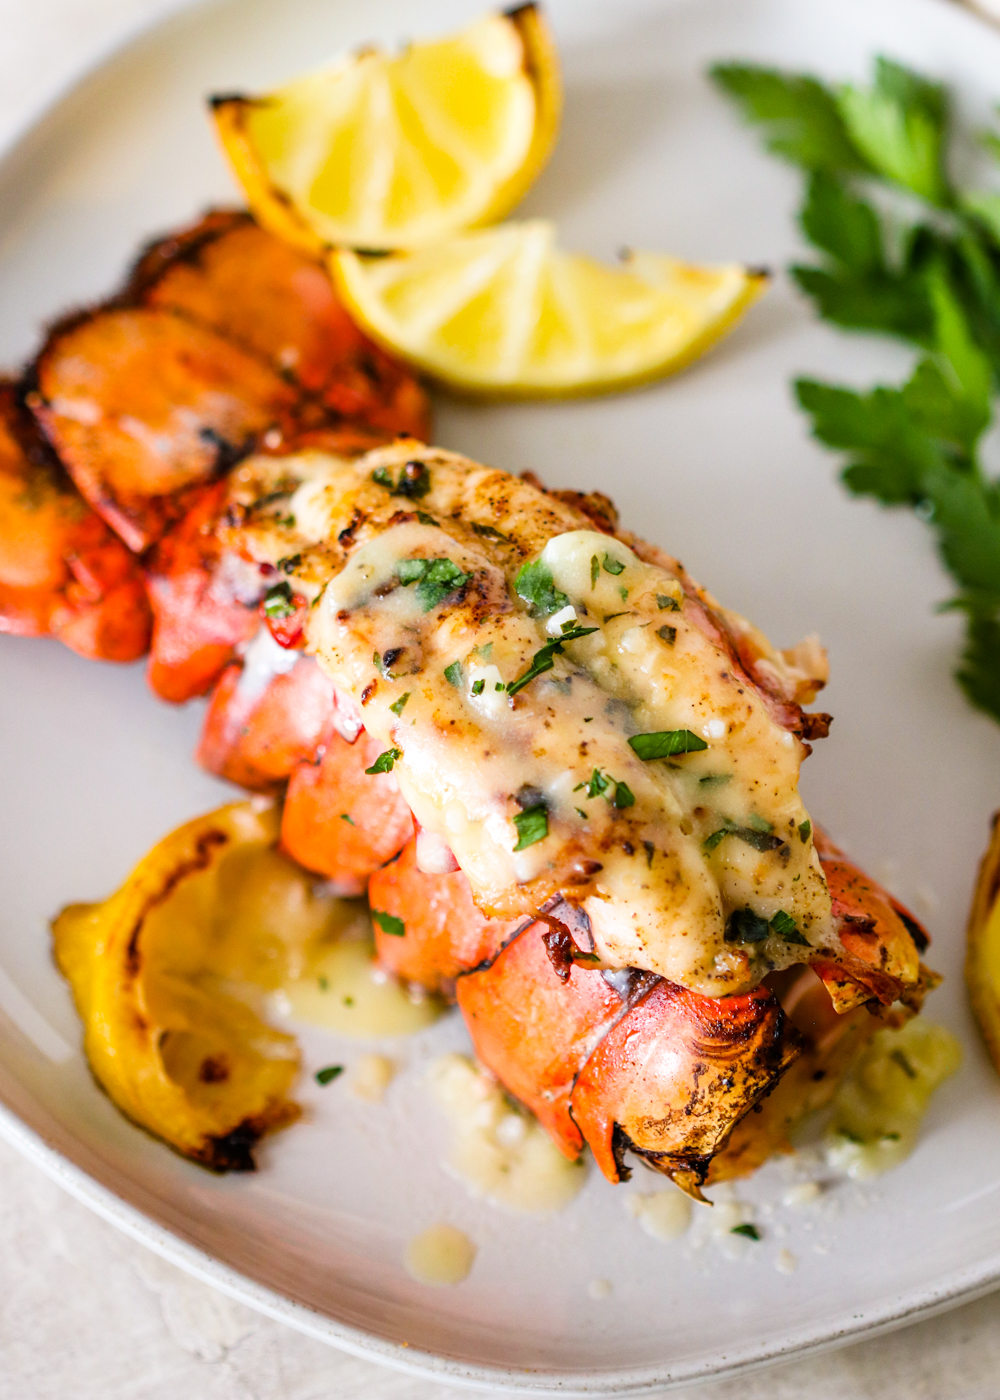 https://gimmedelicious.com/wp-content/uploads/2020/09/Broiled-Lobster-Tails-with-Garlic-Lemon-Butter-1.jpg